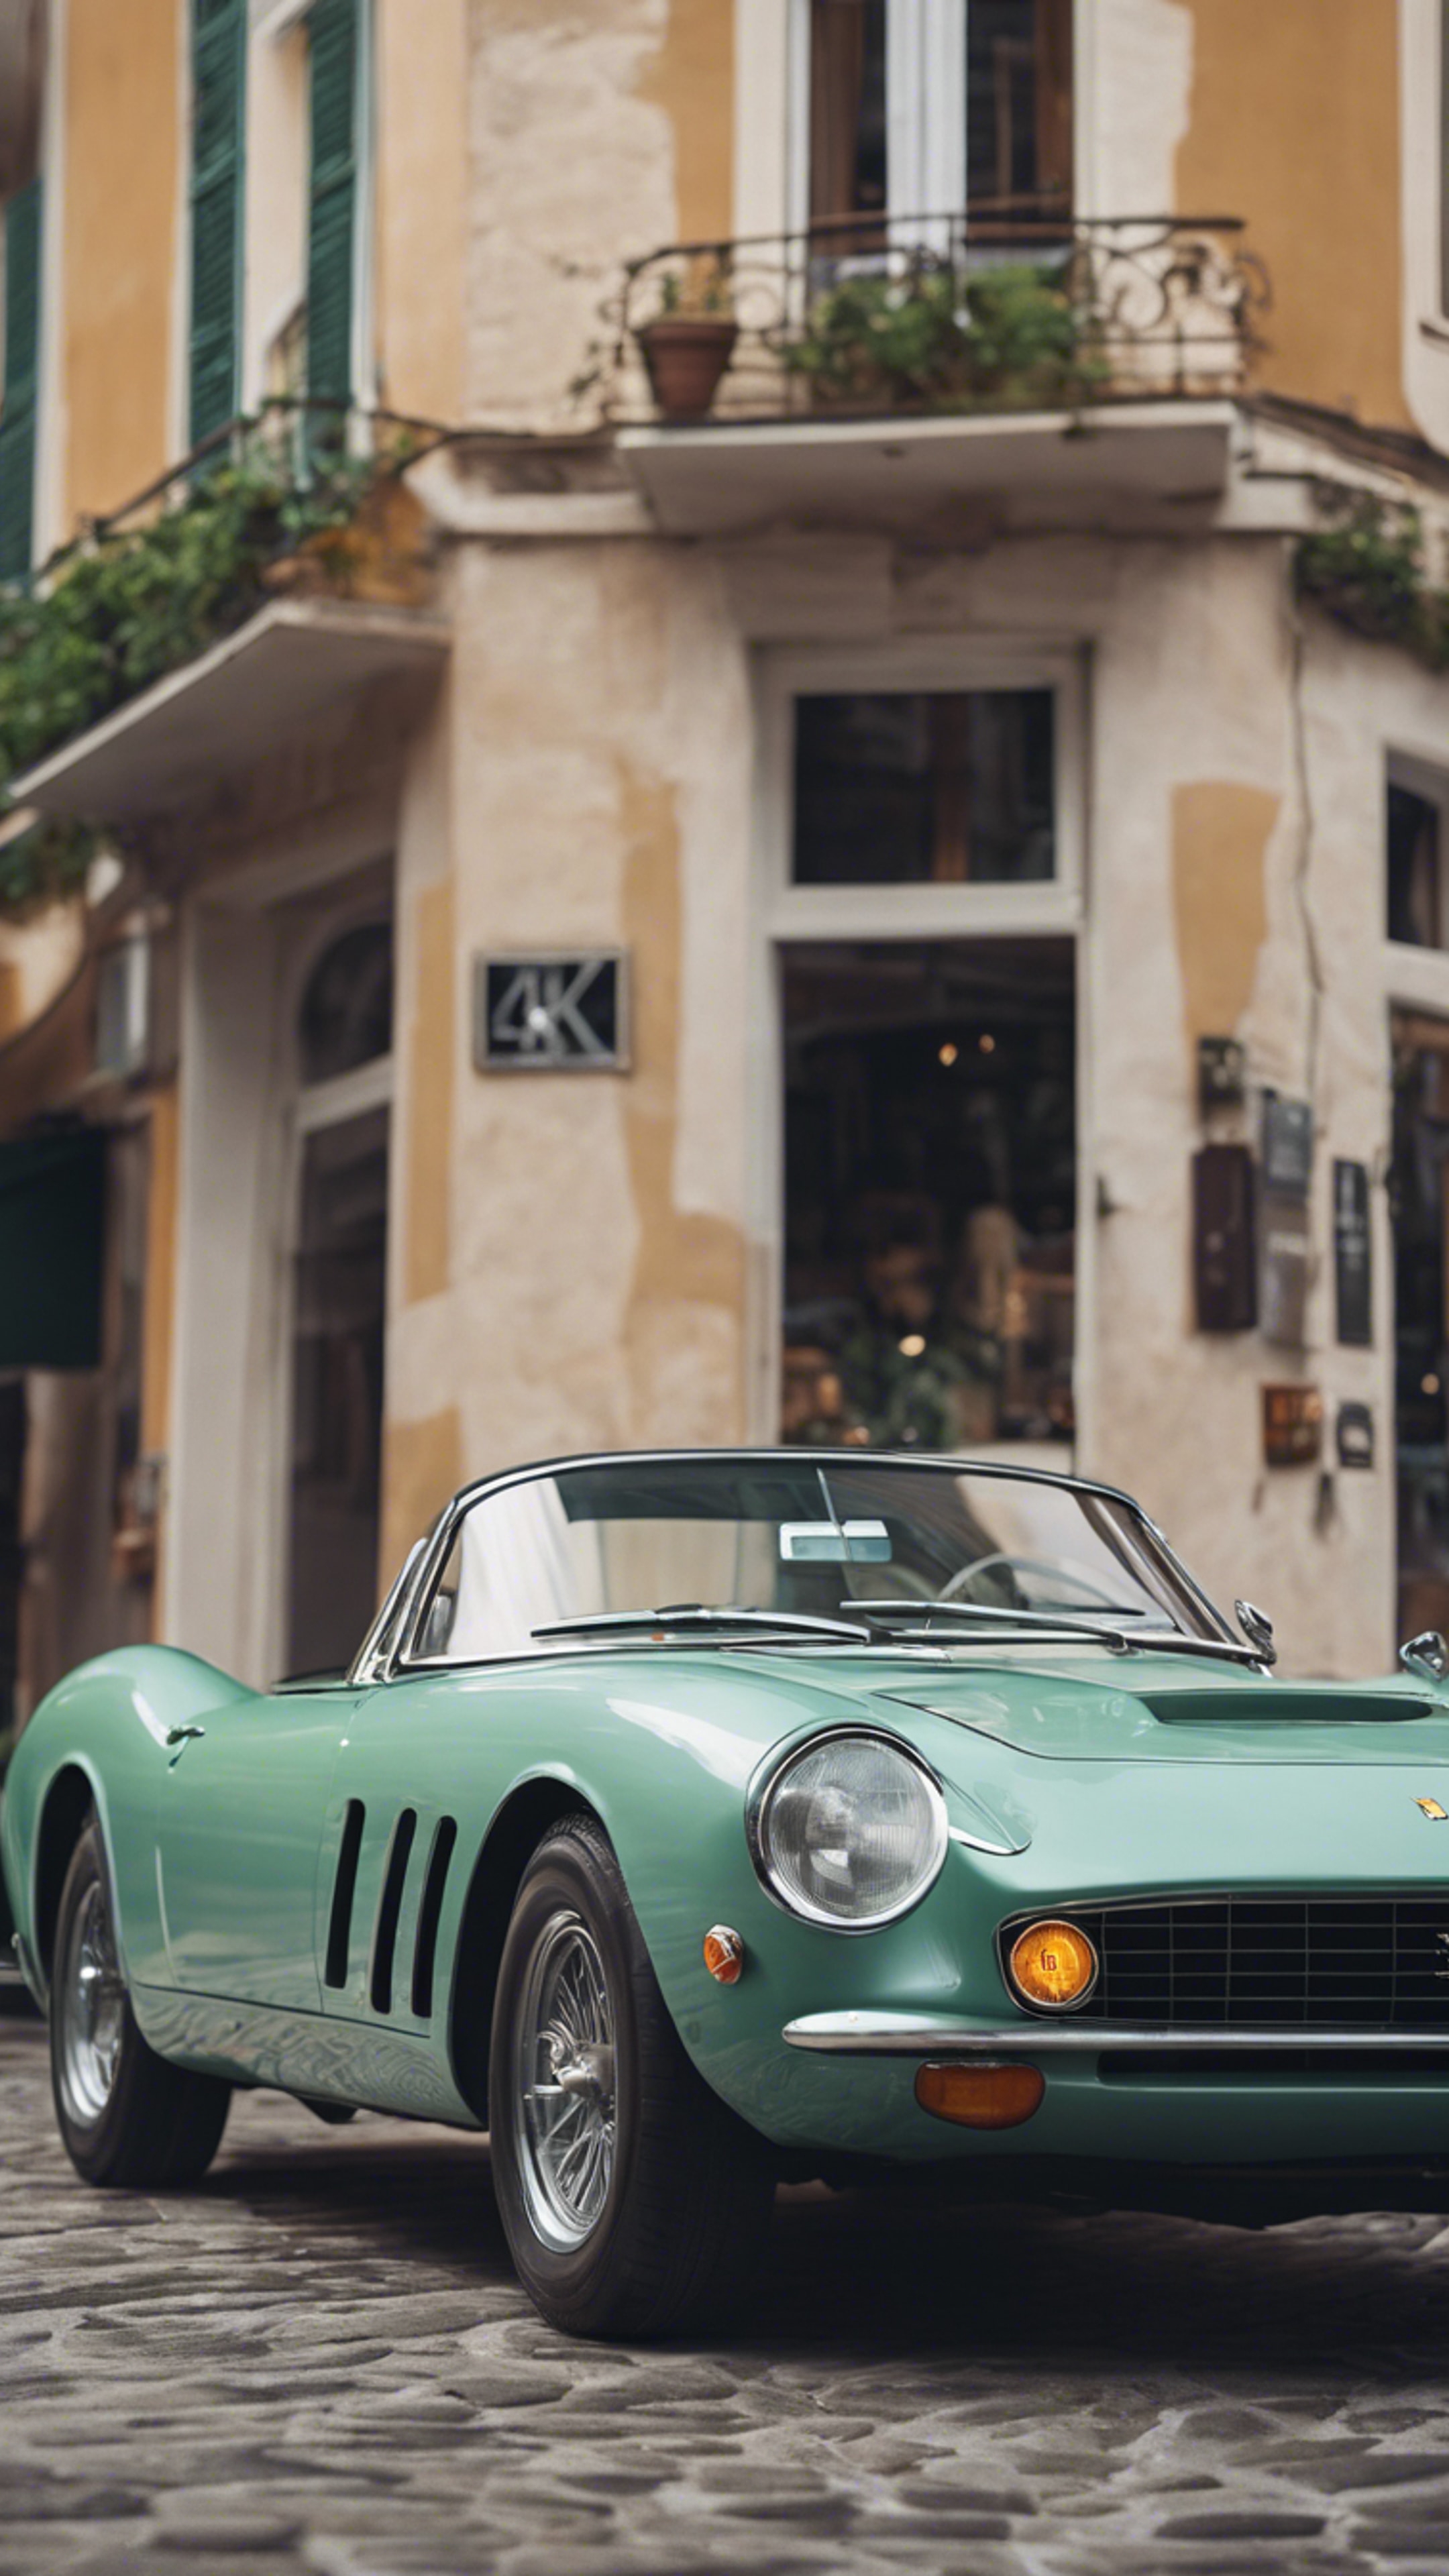 A mint condition vintage Ferrari from the 1960s parked in front of a quaint Italian cafe. Wallpaper[036ef2777f8444bdaf14]